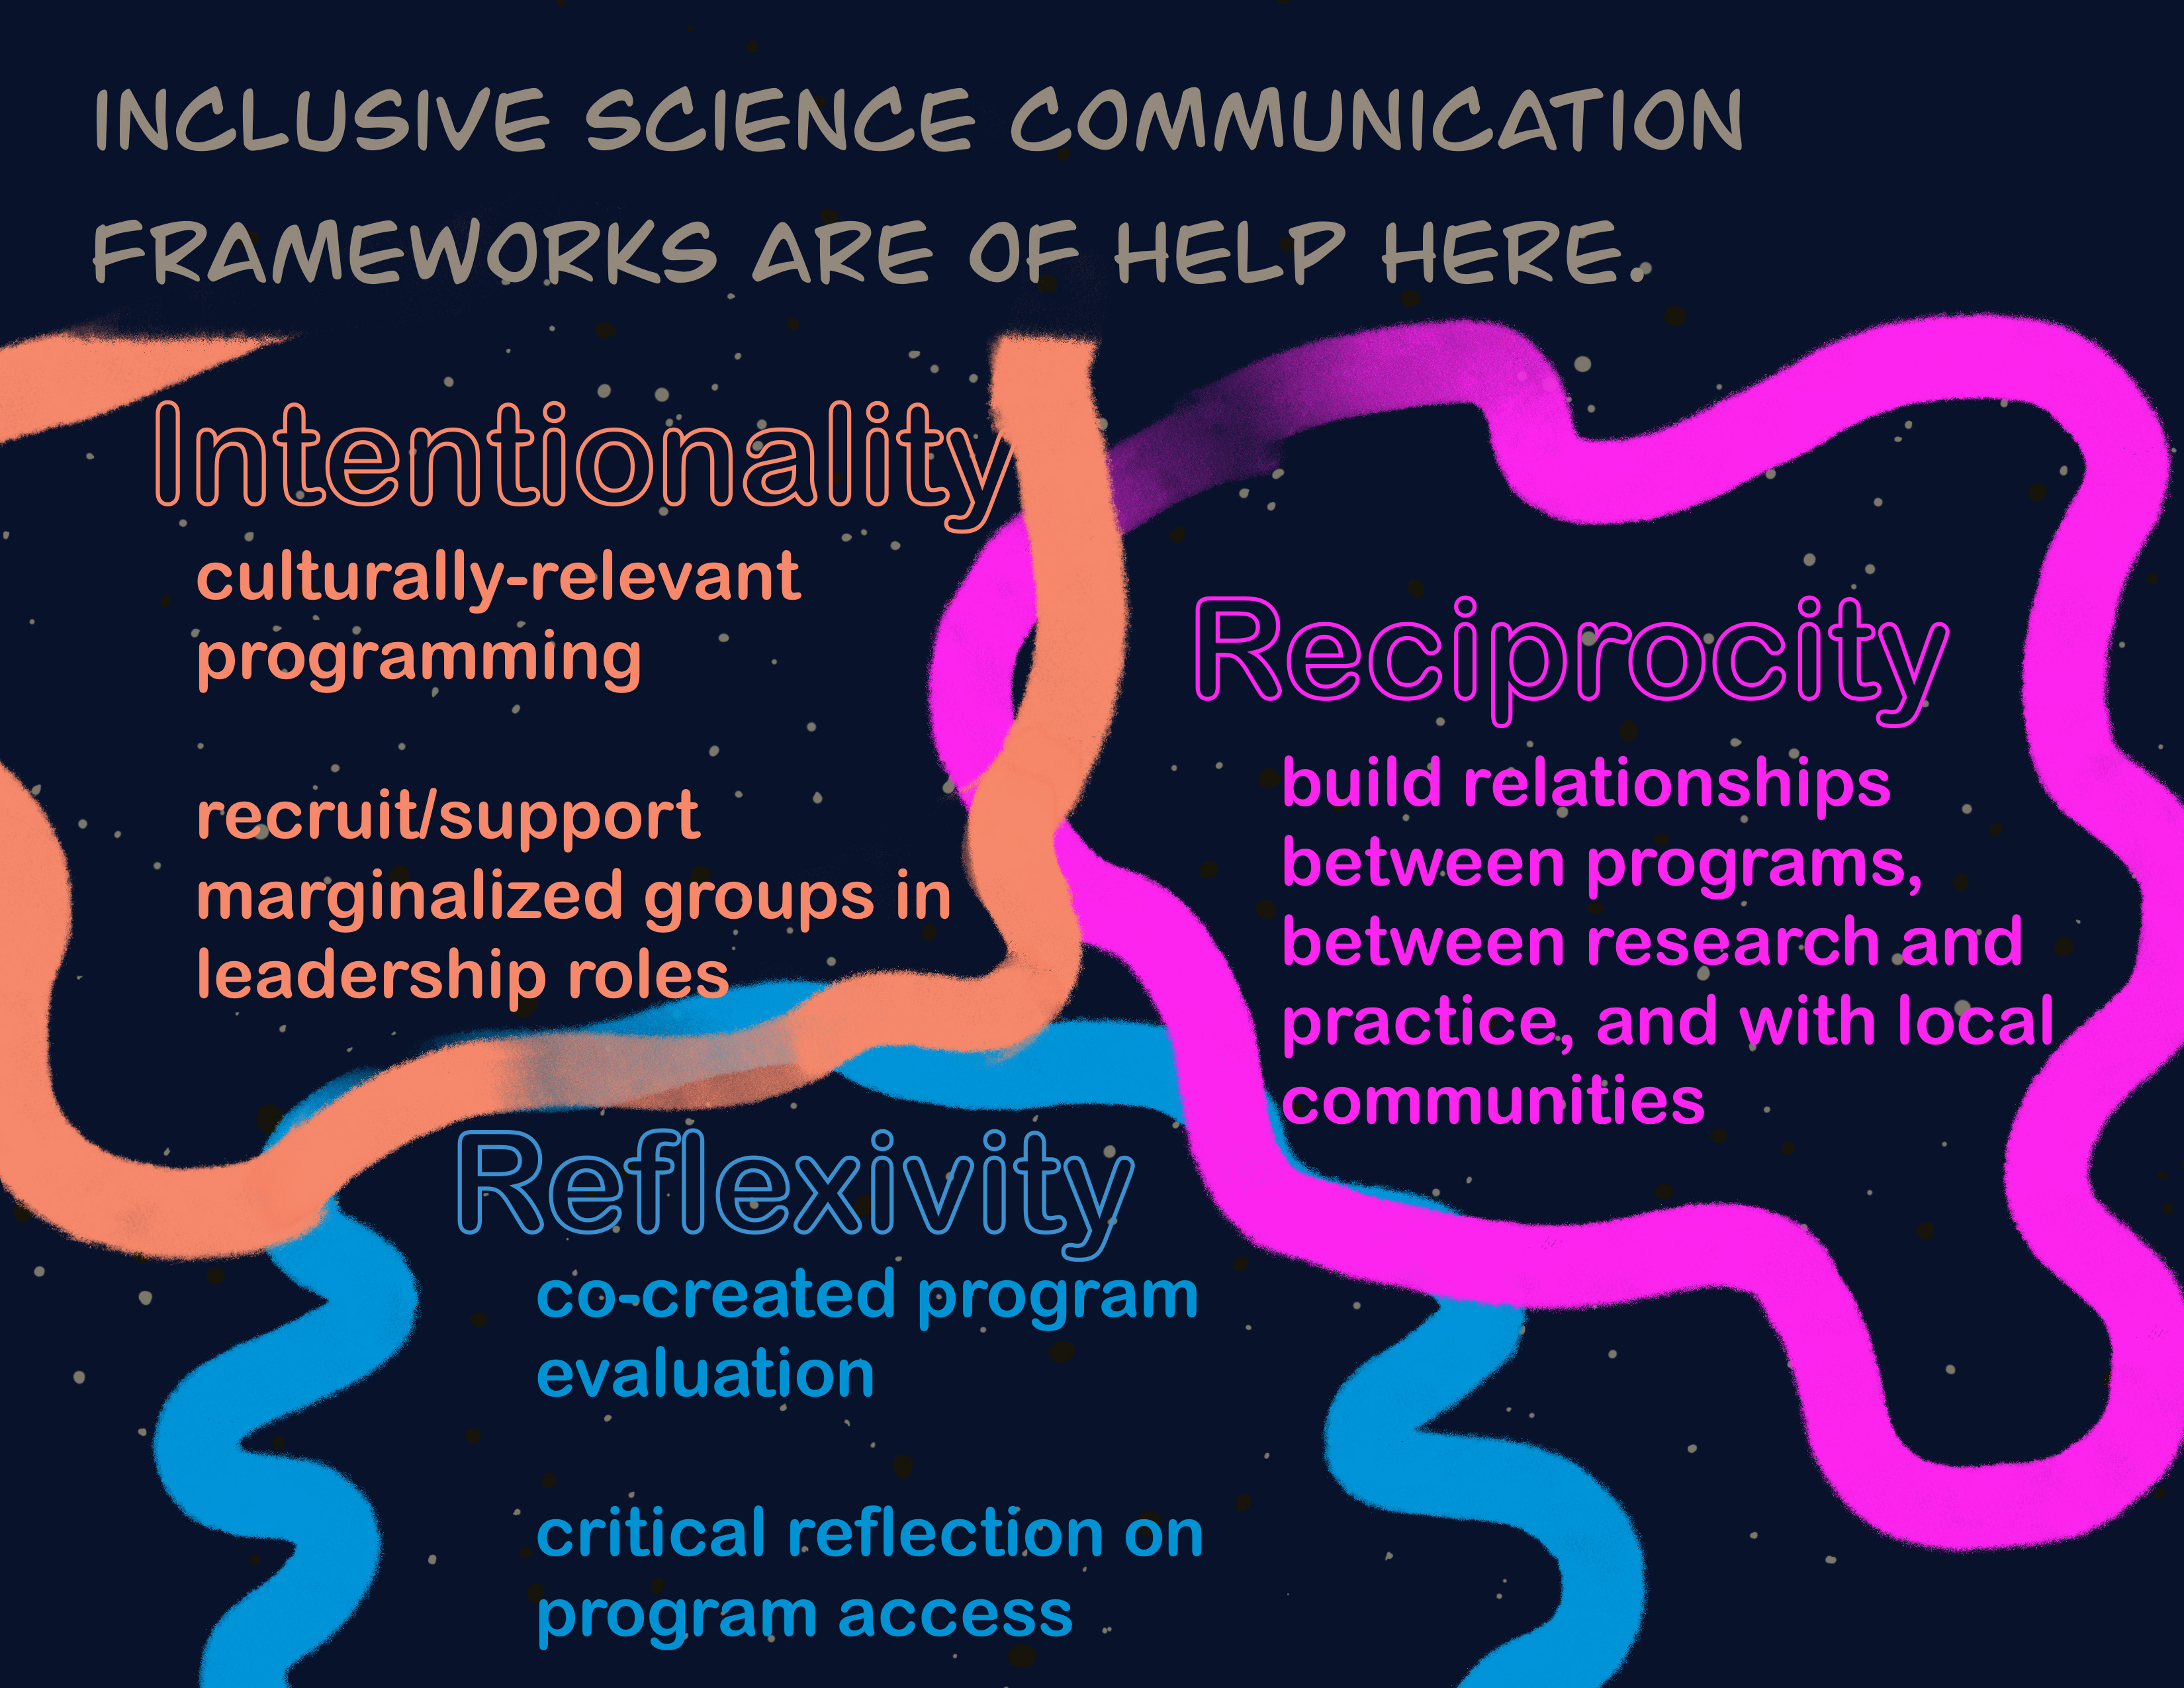 Inclusive science communication frameworks are of help here. Intentionality: culturally relevant programming, recruit/support marginalized groups in leadership roles. Reflexivity: co-created program evaluation, critical reflection on program access. Reciprocity: build relationships between programs, between research and practice, and with local communities.